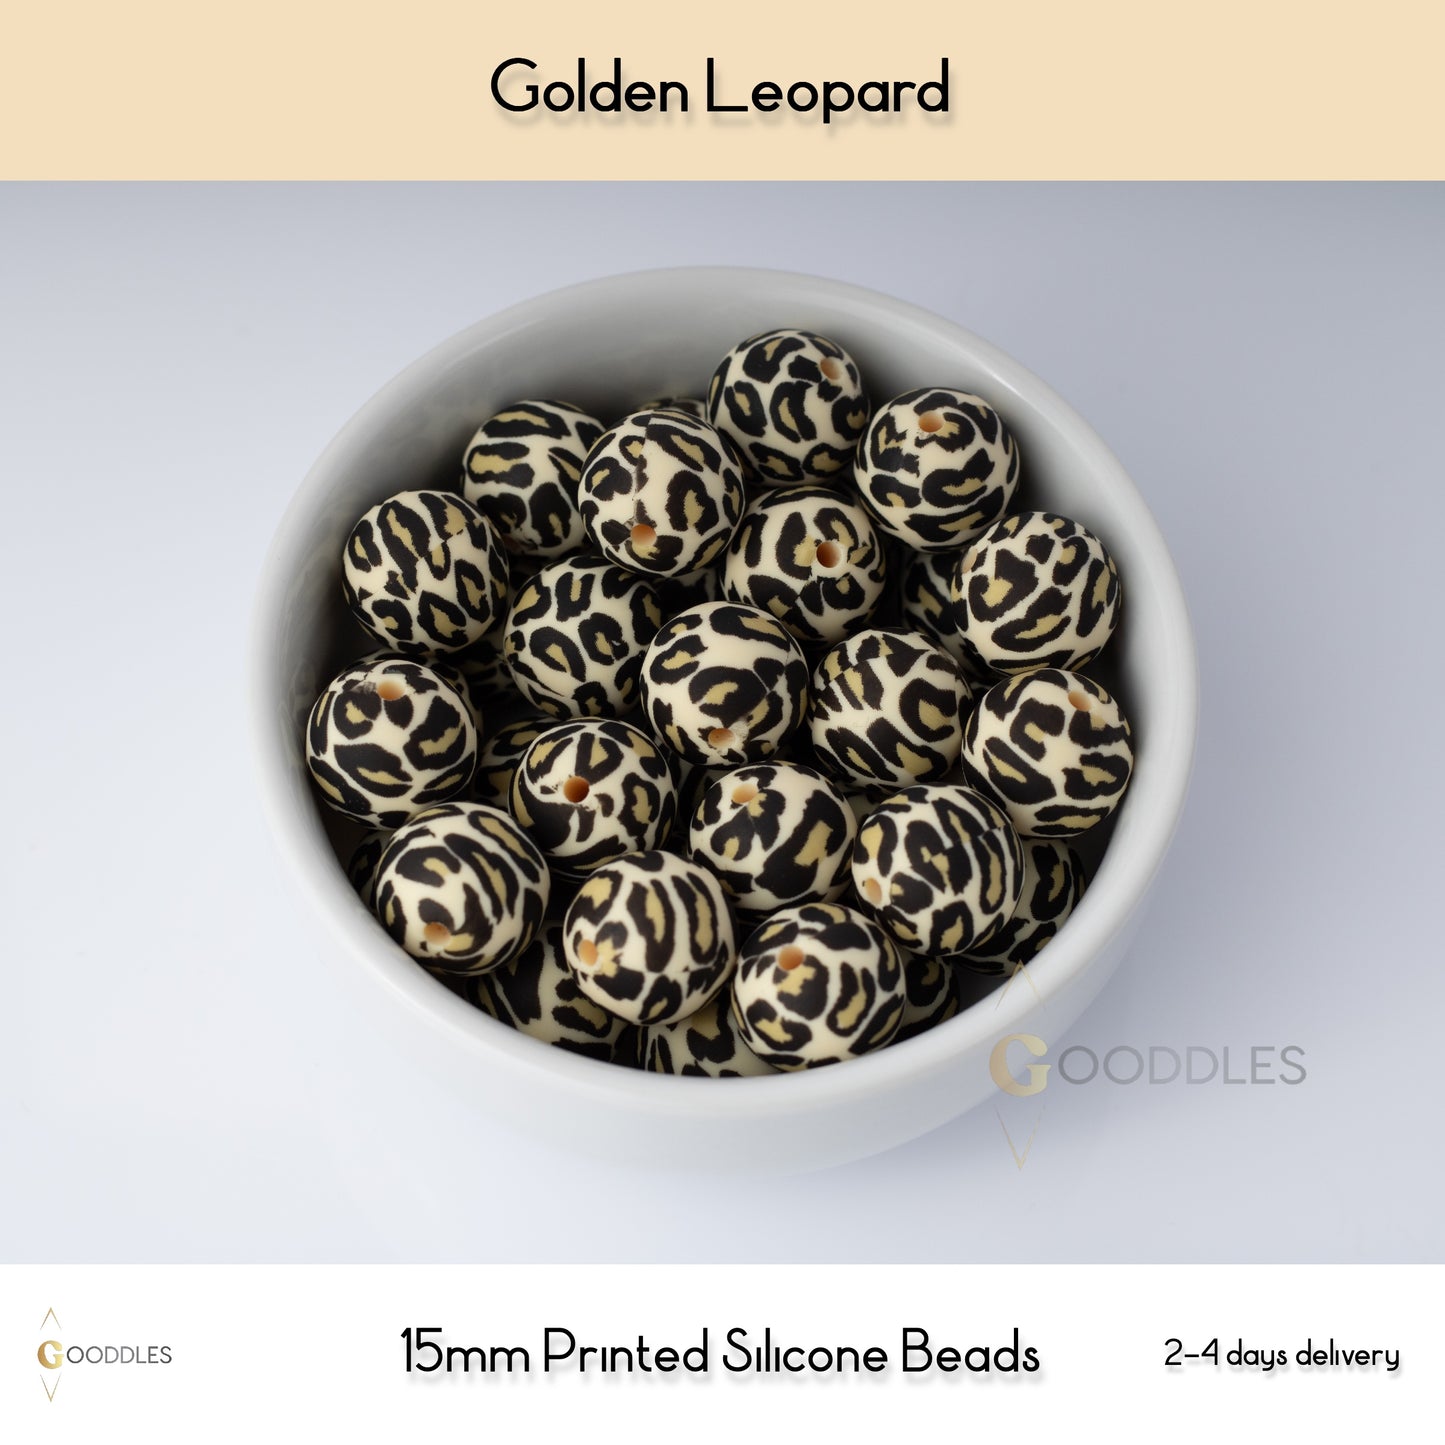 5pcs, Golden Leopard Silicone Beads Printed Round Silicone Beads